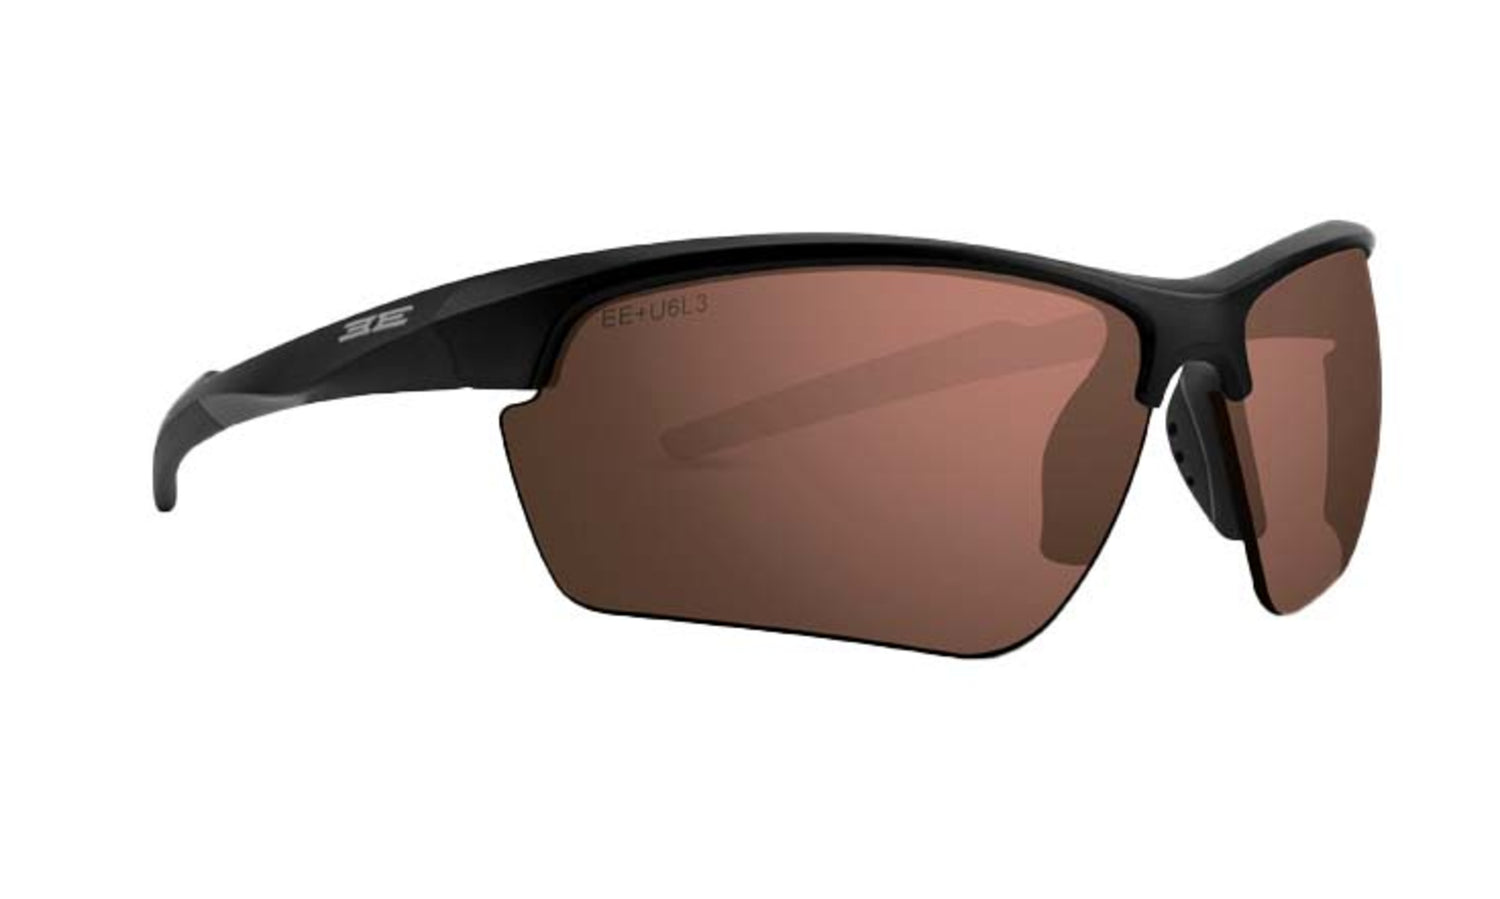 A pair of Kennedy Sport Wrap Sunglasses with lightweight frame and UVA/UVB protection.